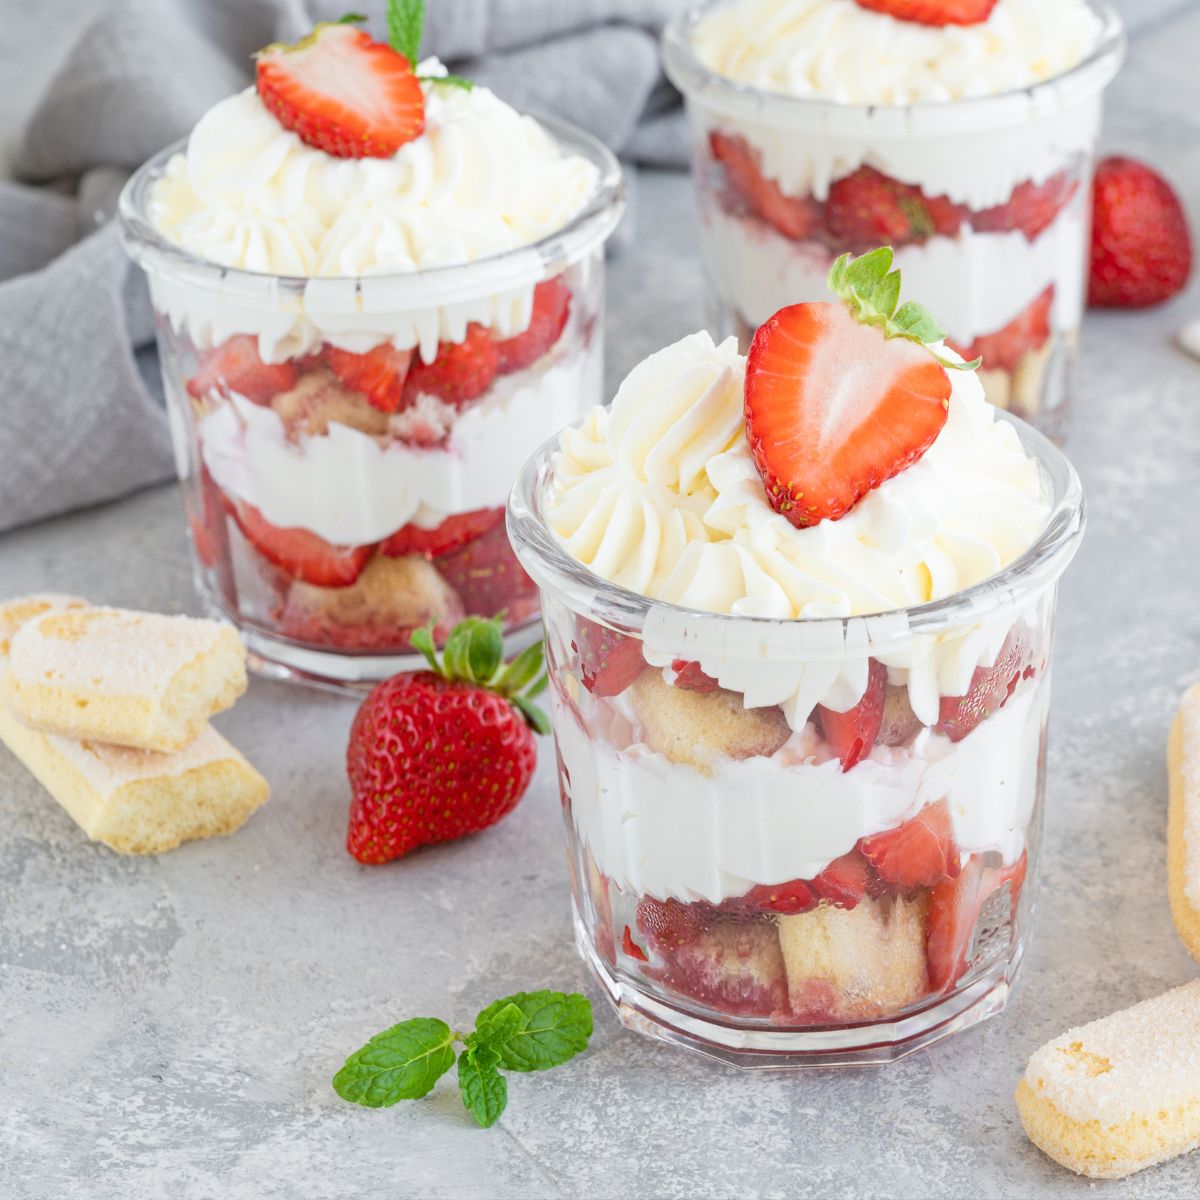 Strawberry trifle in glasses with whipped cream and mint. 
Keywords: strawberry dessert, trifle recipe